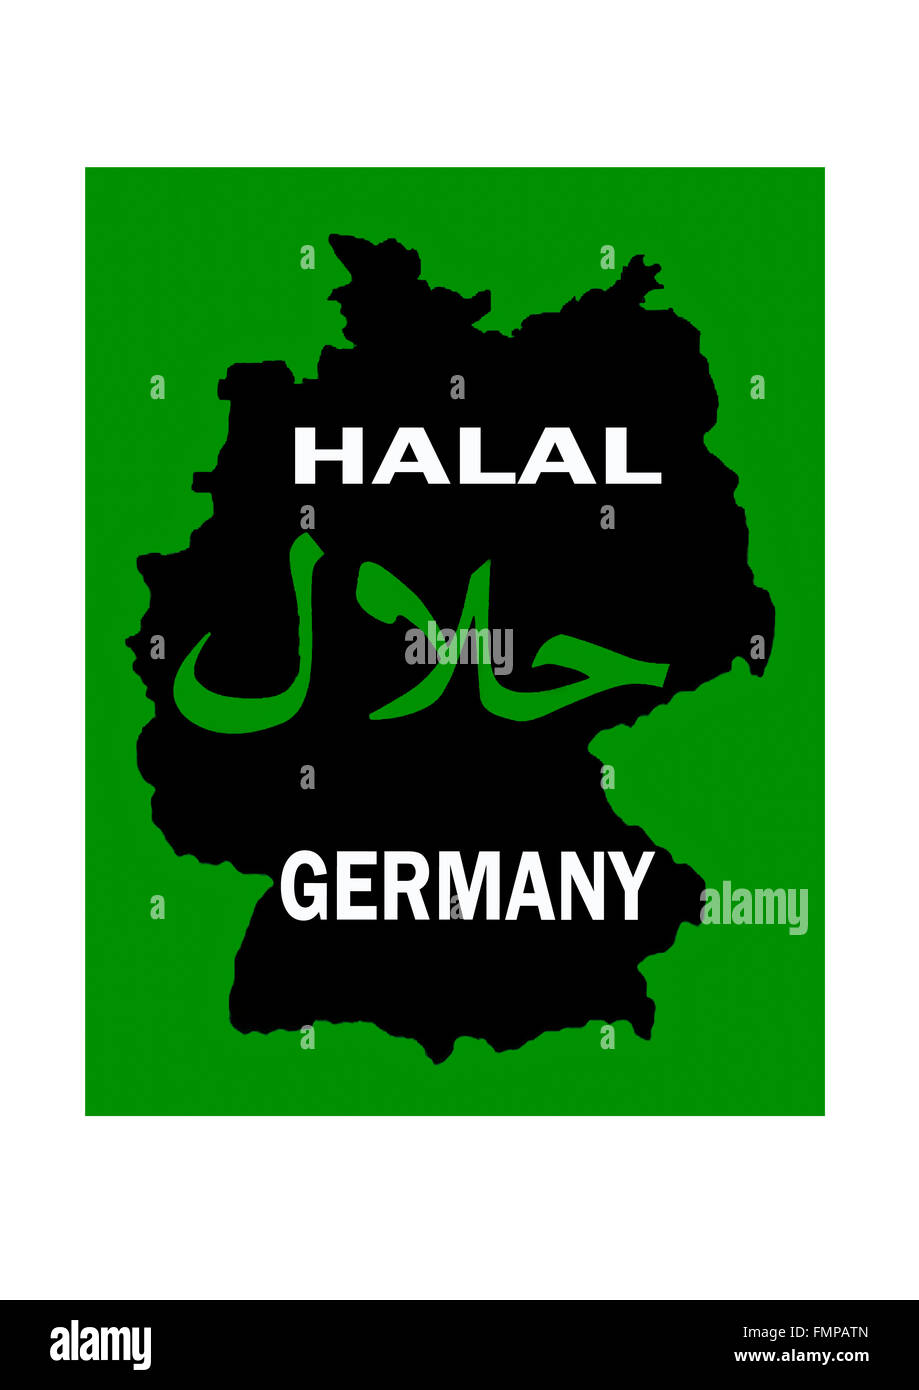 Halal certification for islamic pure meat or food in Germany Stock Photo